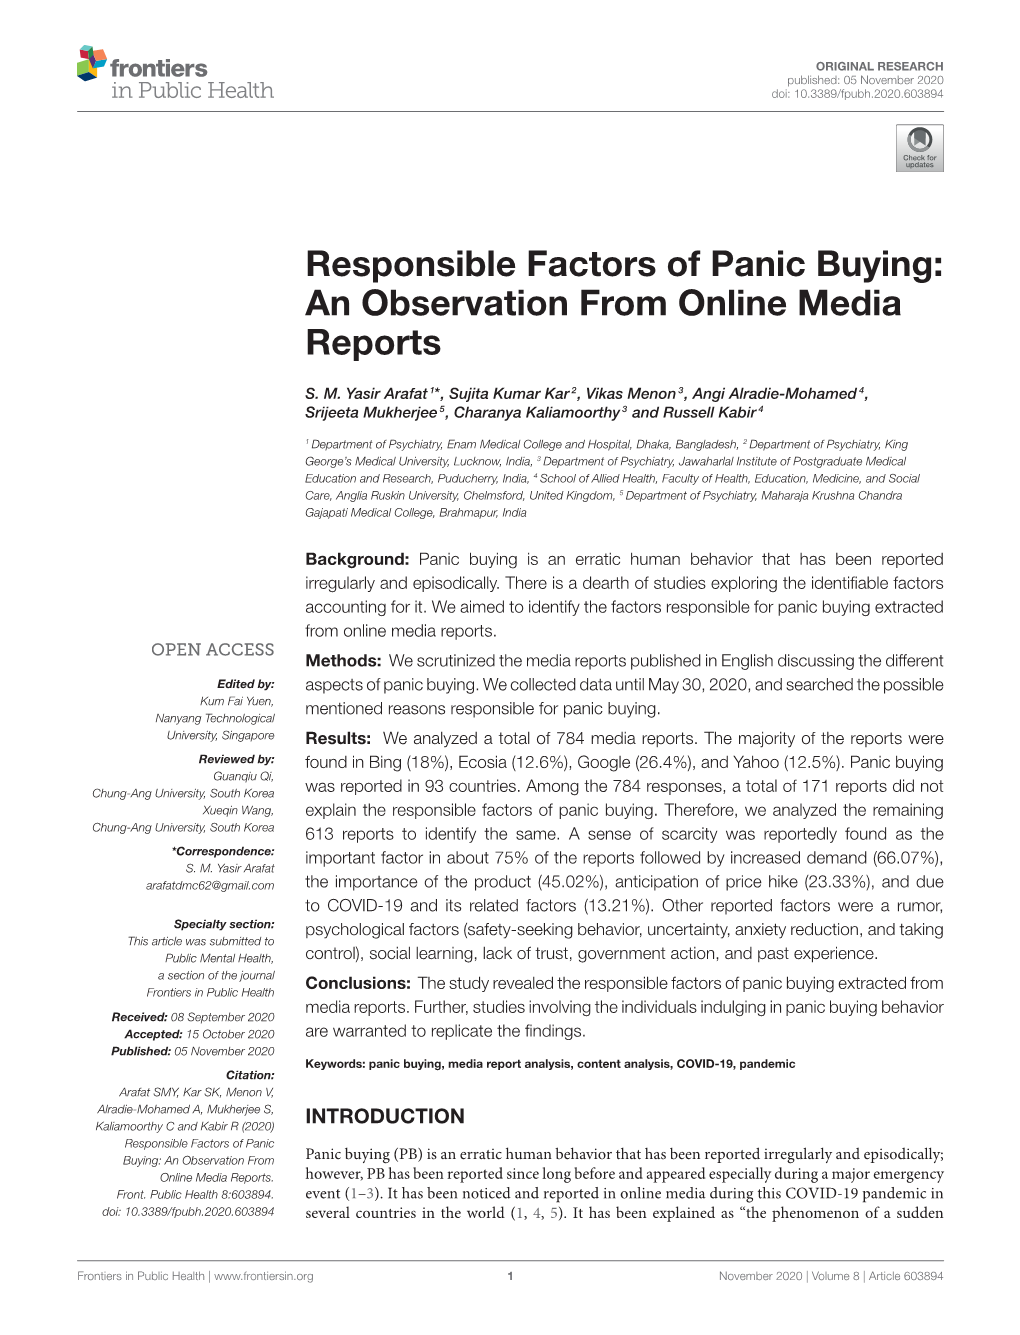 Responsible Factors of Panic Buying: an Observation from Online Media Reports